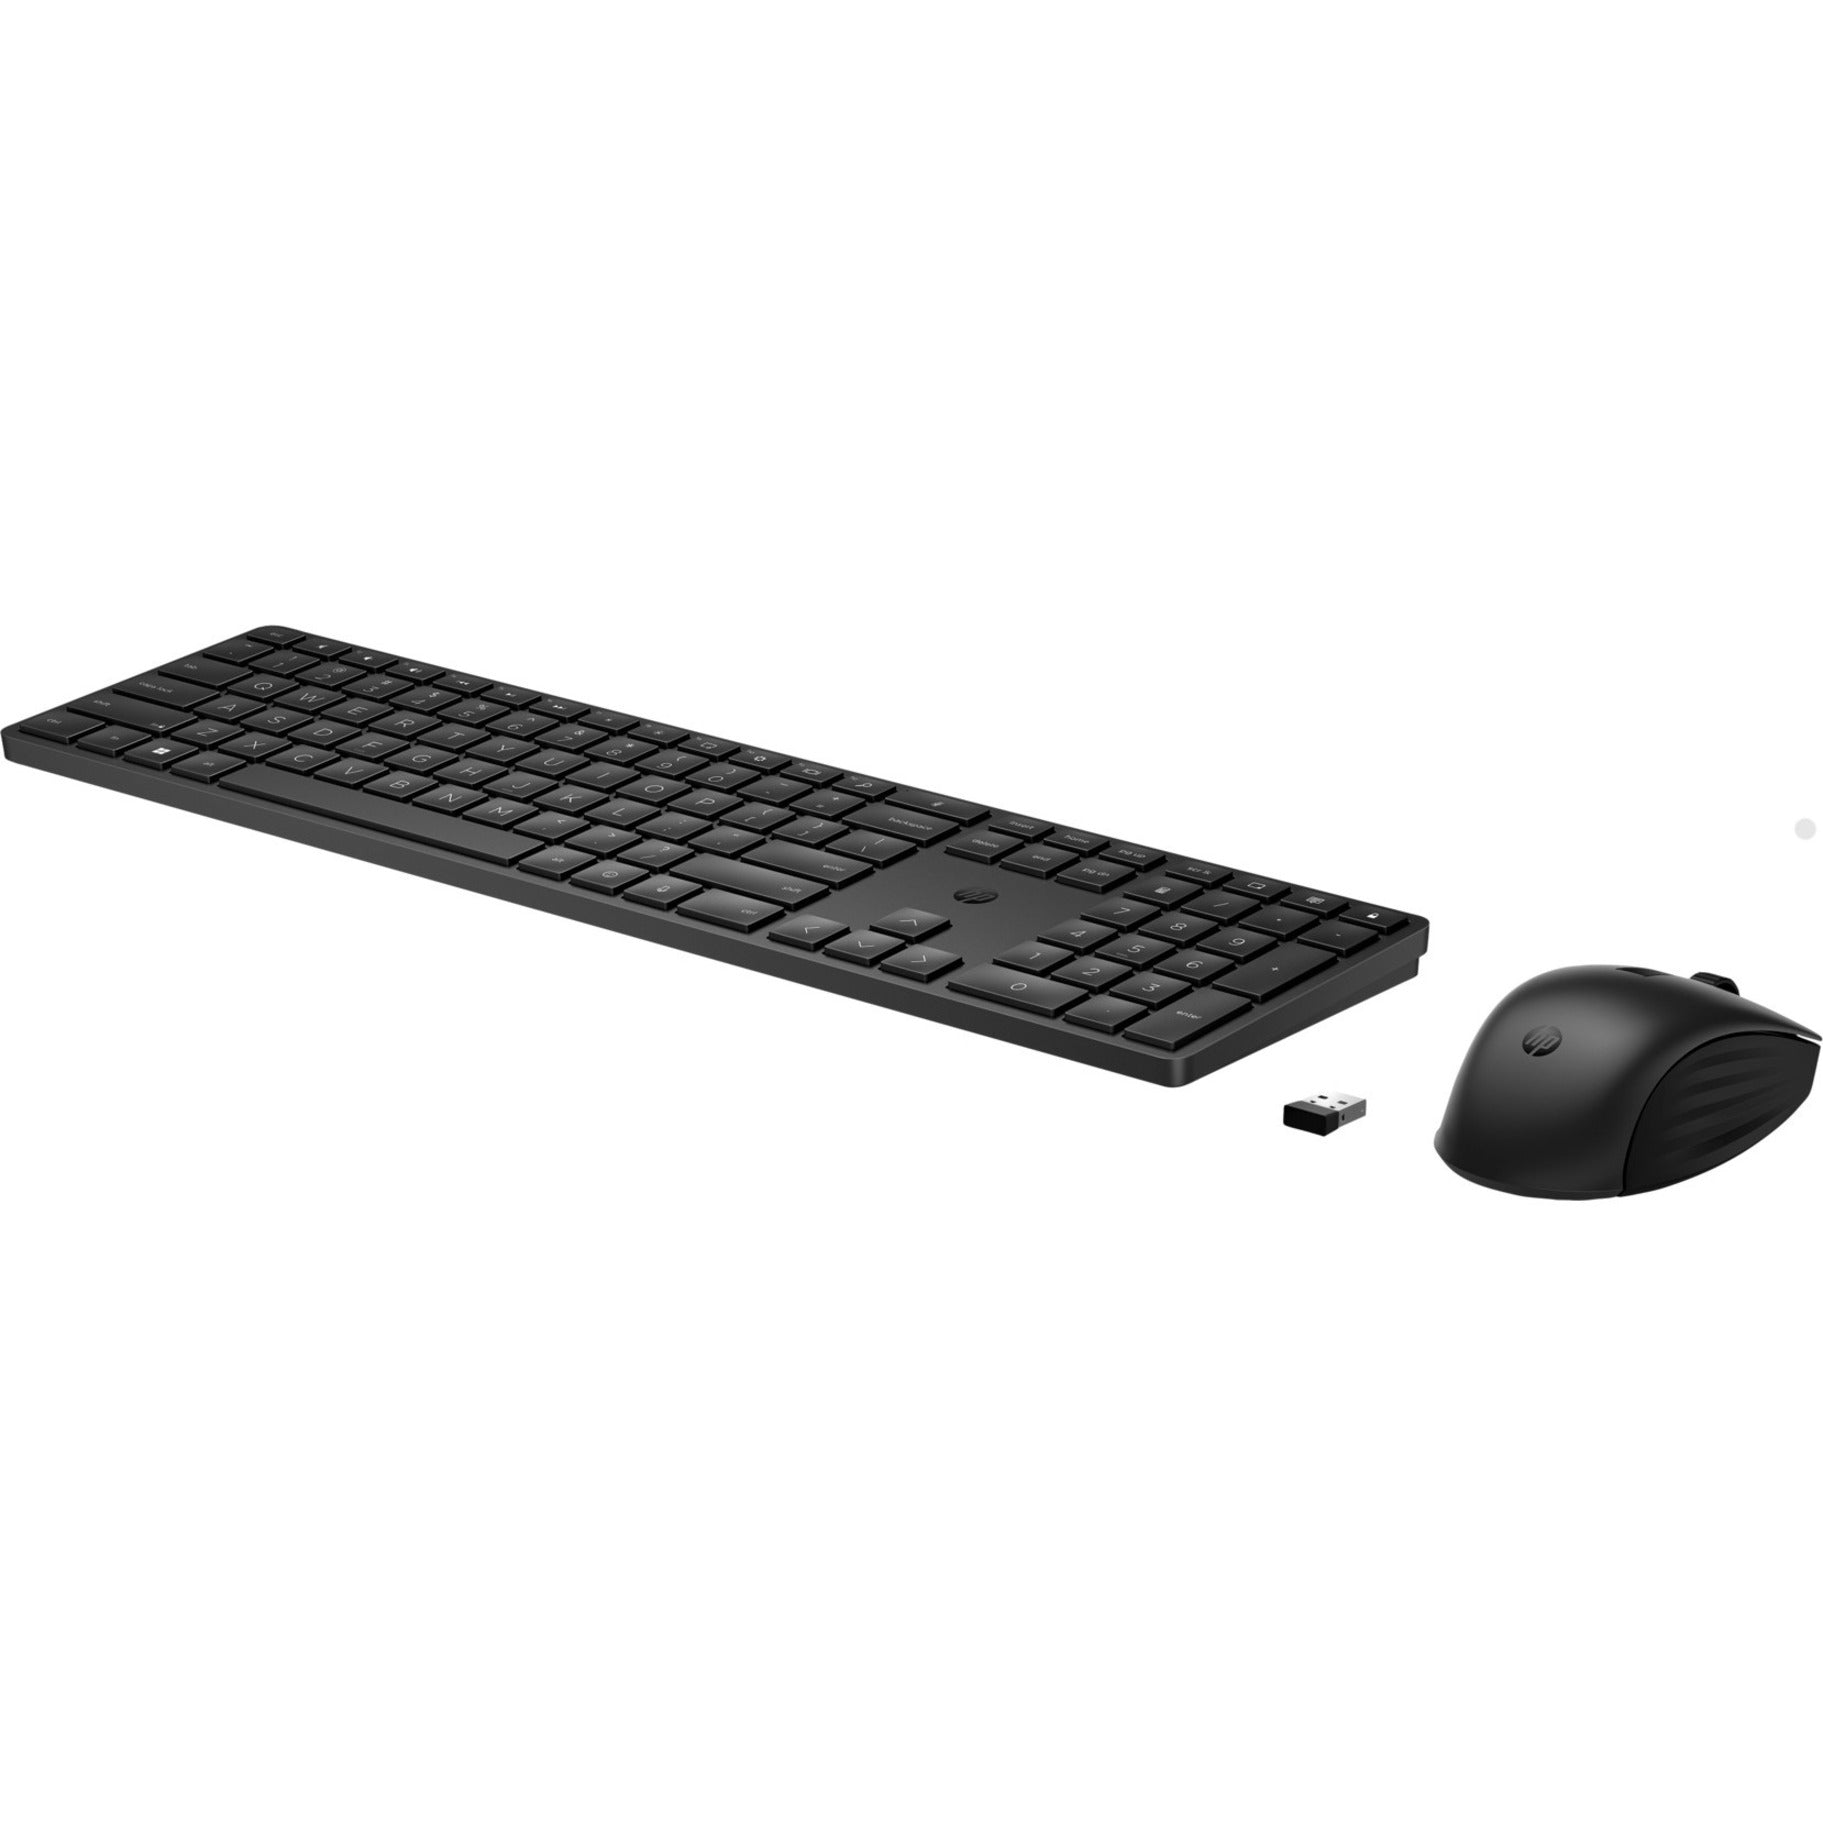 HP 655 Wireless Keyboard and Mouse Combo for business, Battery Indicator, Programmable Keys